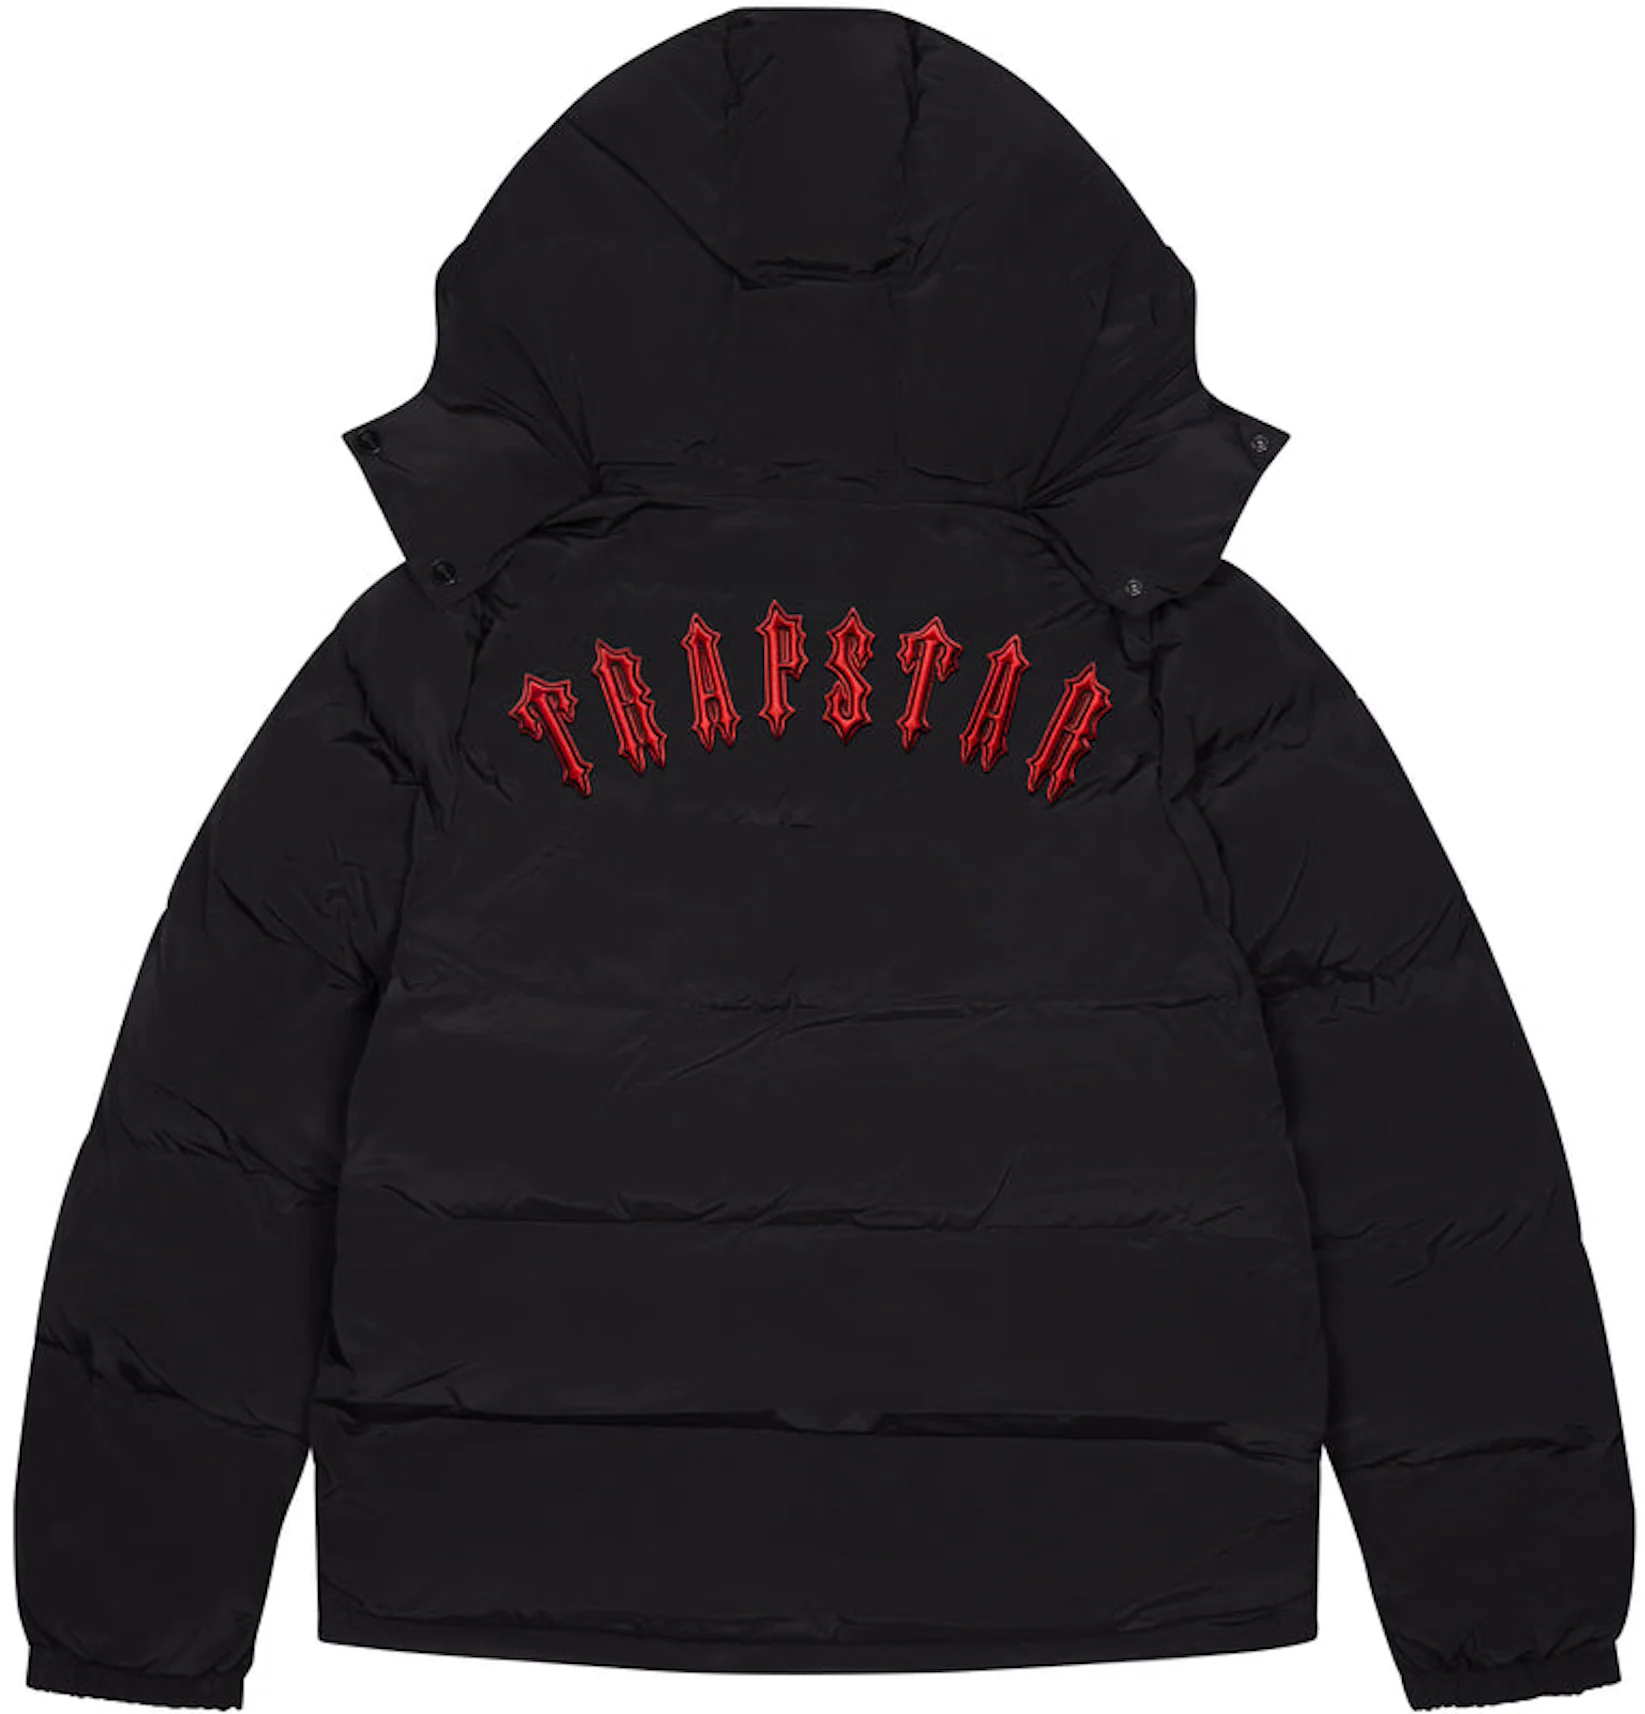 https://images.stockx.com/images/Trapstar-Irongate-Detachable-Hooded-Puffer-Jacket-Black-Infrared.jpg?fit=fill&bg=FFFFFF&w=1200&h=857&fm=webp&auto=compress&dpr=2&trim=color&updated_at=1664314158&q=60